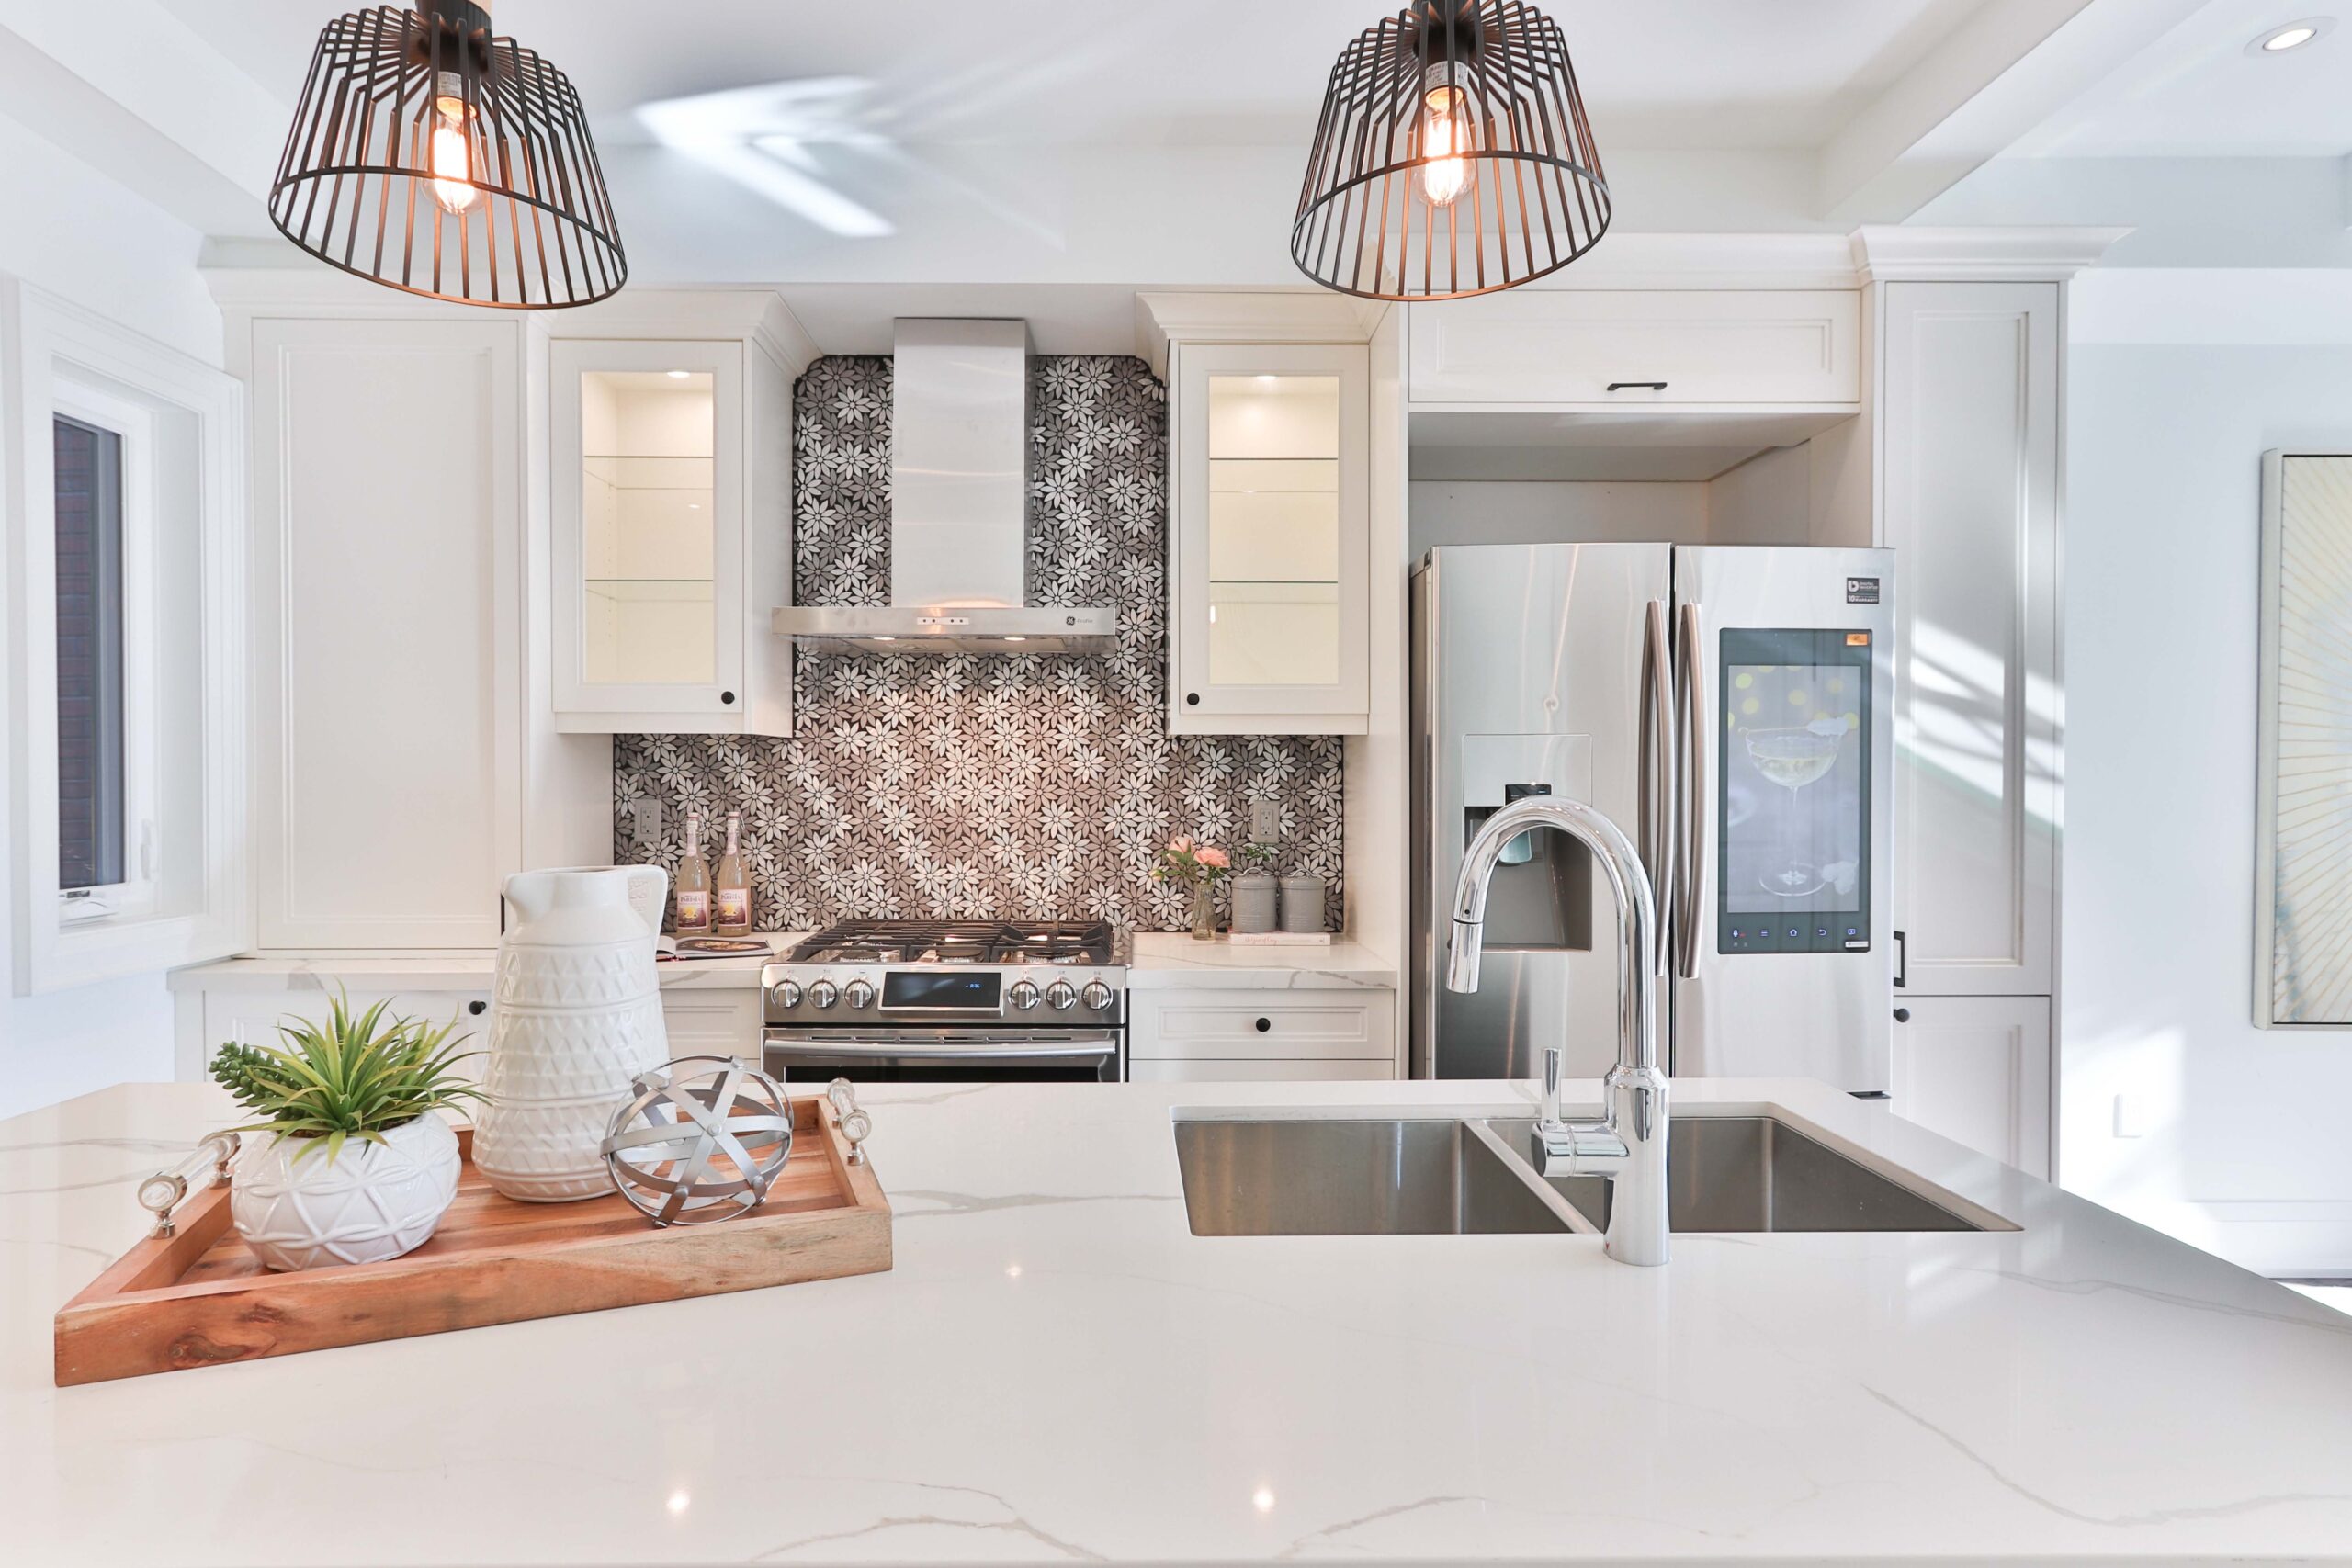 Quartz countertops will continue to be a kitchen design trend in 2024. These countertops are versatile in style, easy to clean and durable. Pictured: Quartz countertops in a kitchen.